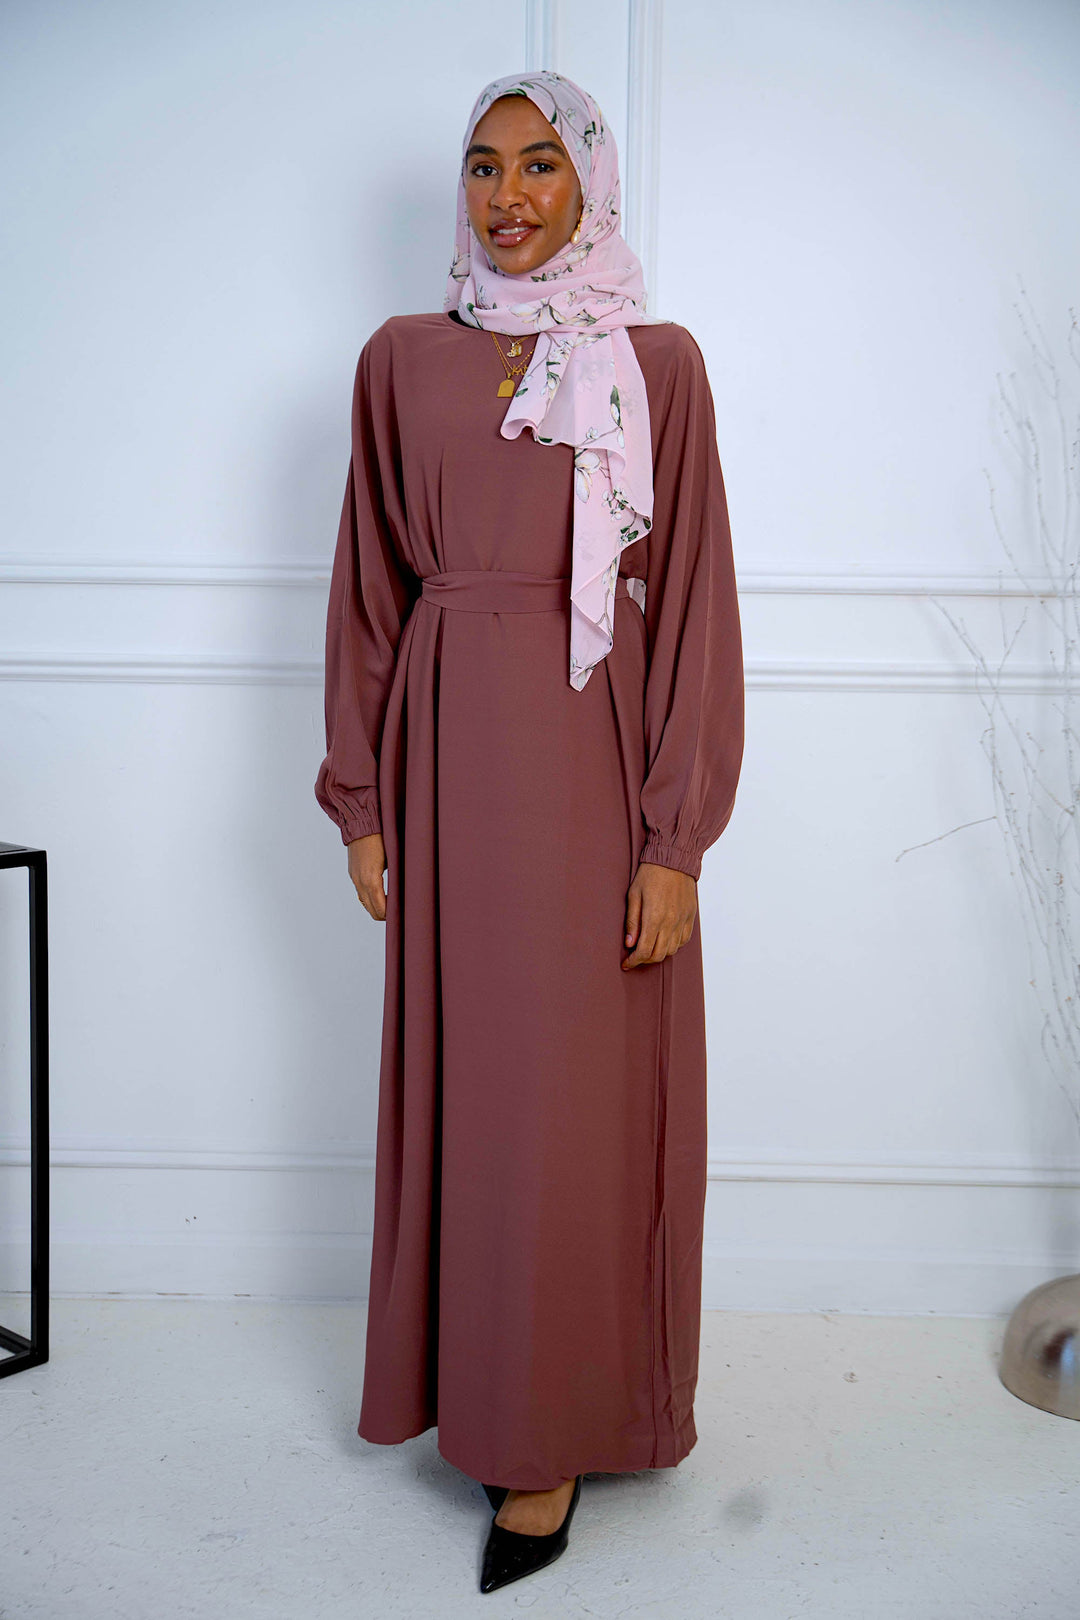 a woman in a brown dress and a pink scarf